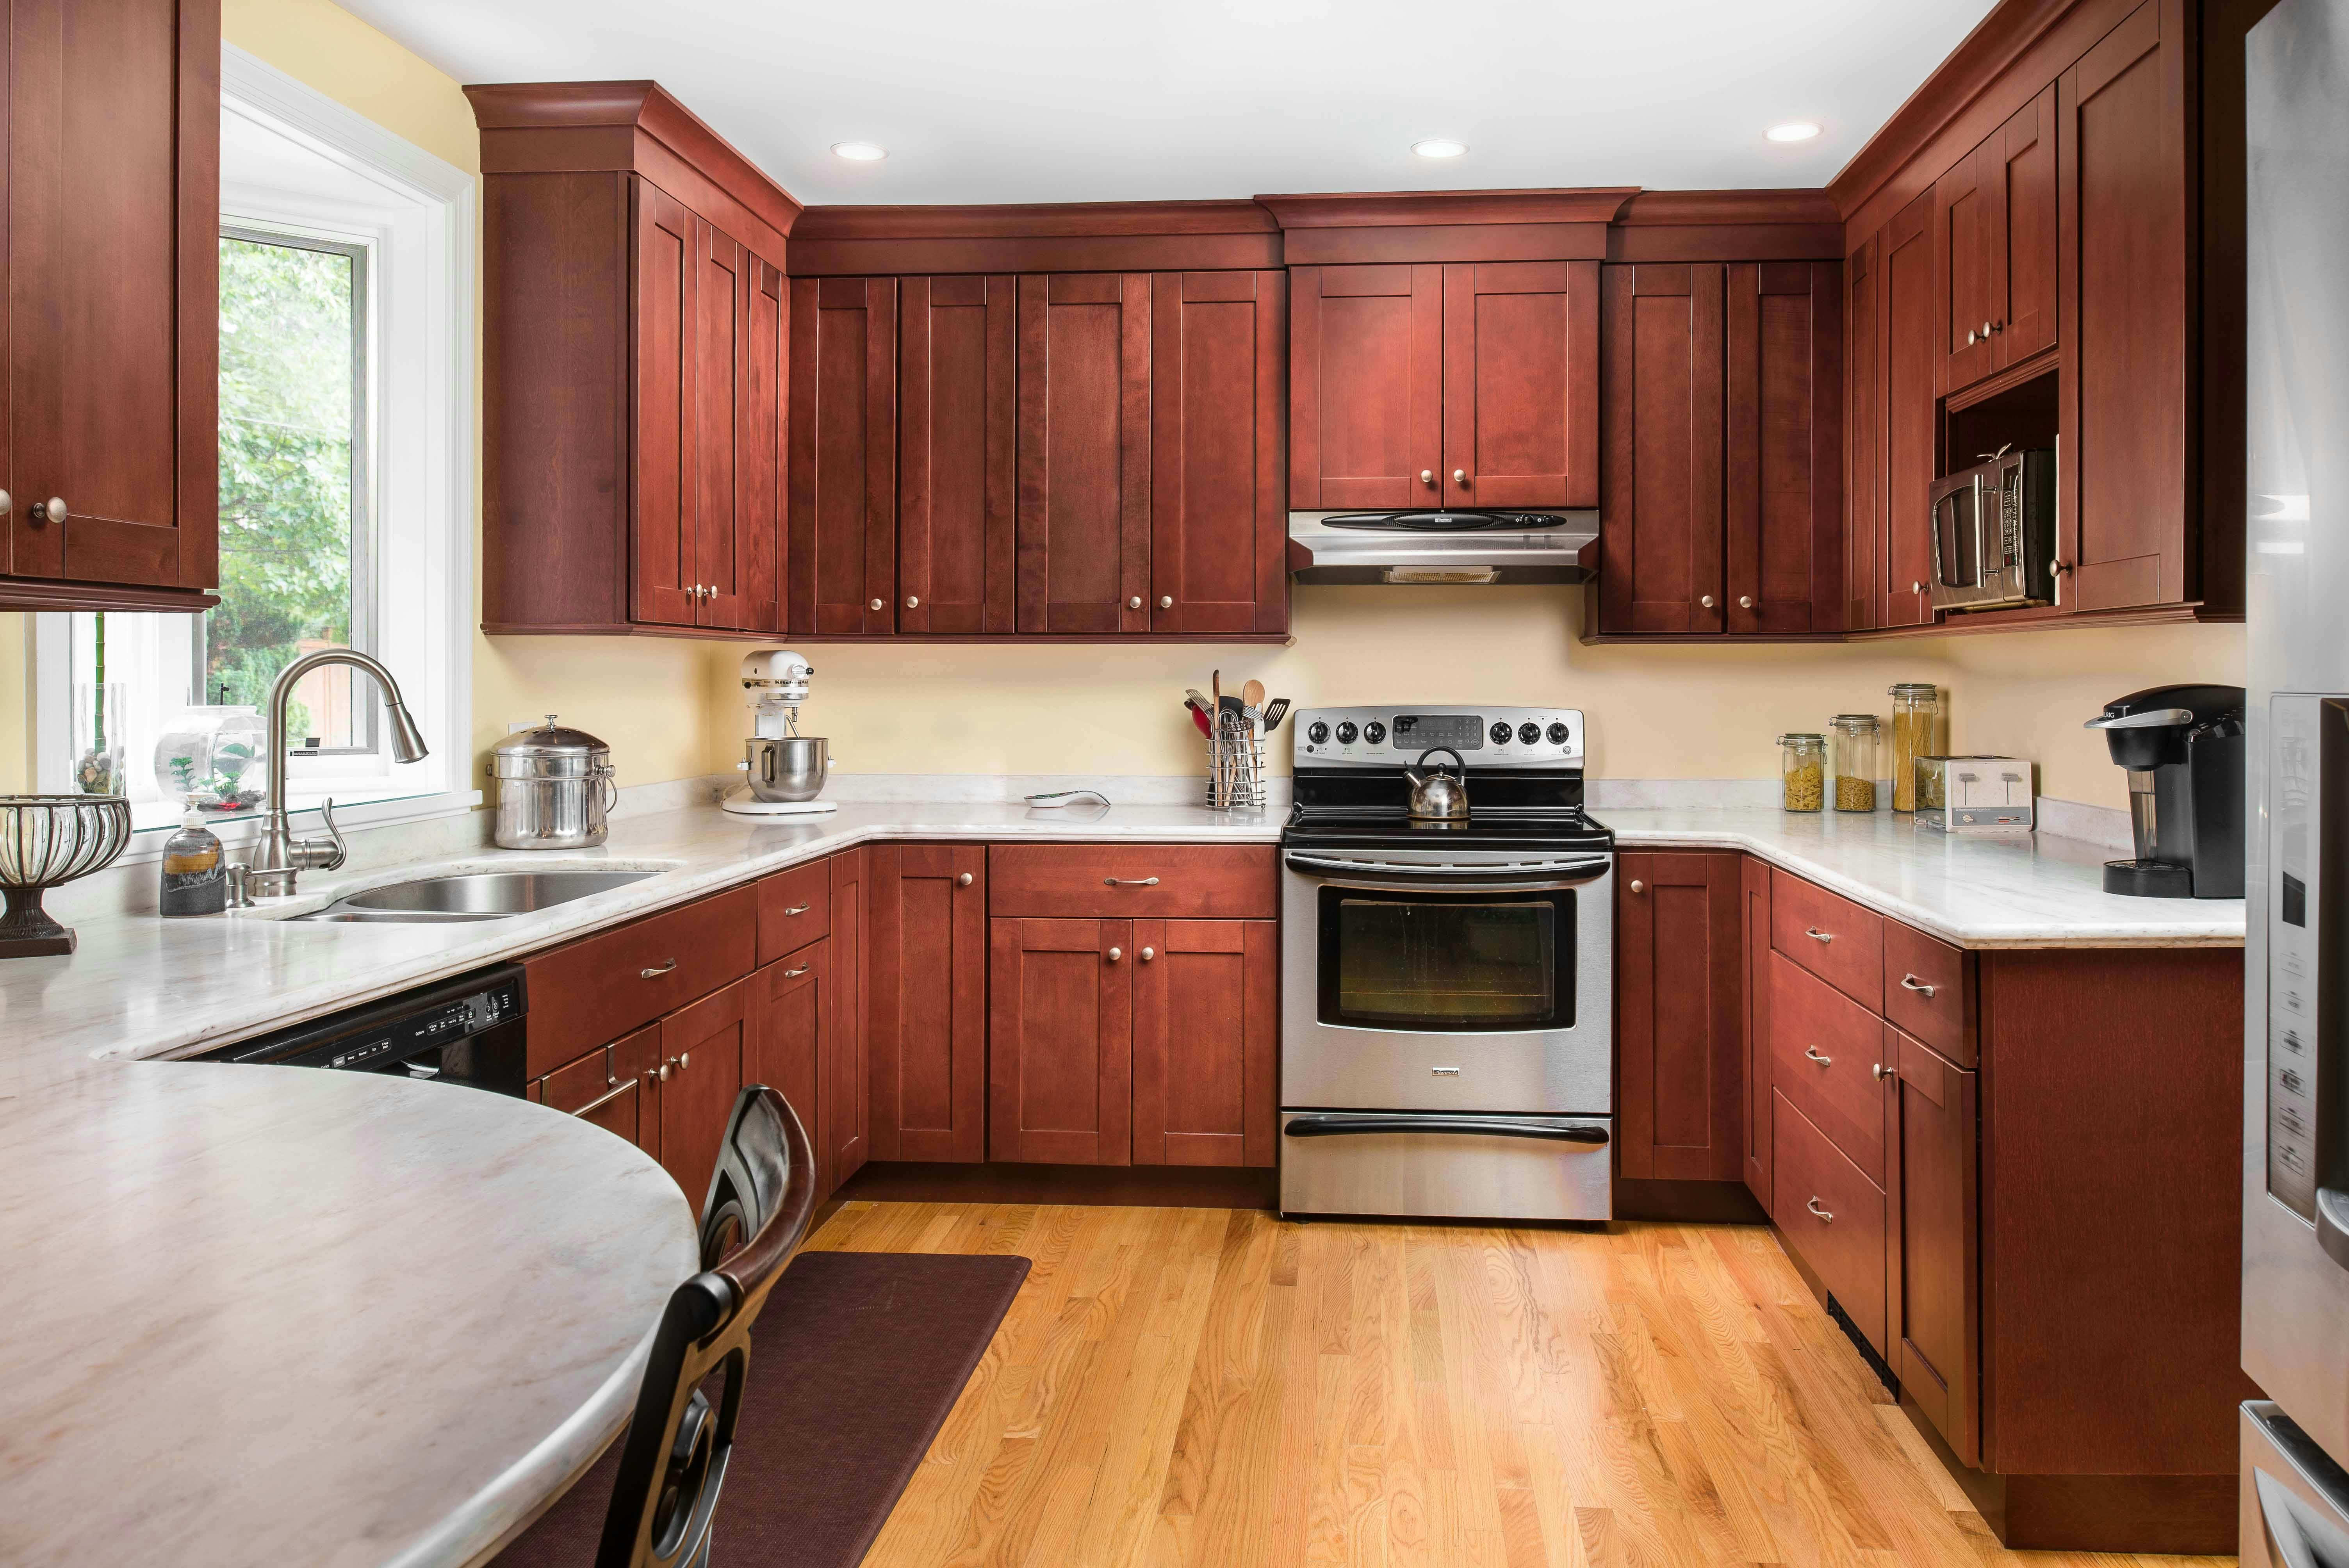 Why Shaker Style Kitchen Cabinets Never, What Is A Shaker Cabinet Style